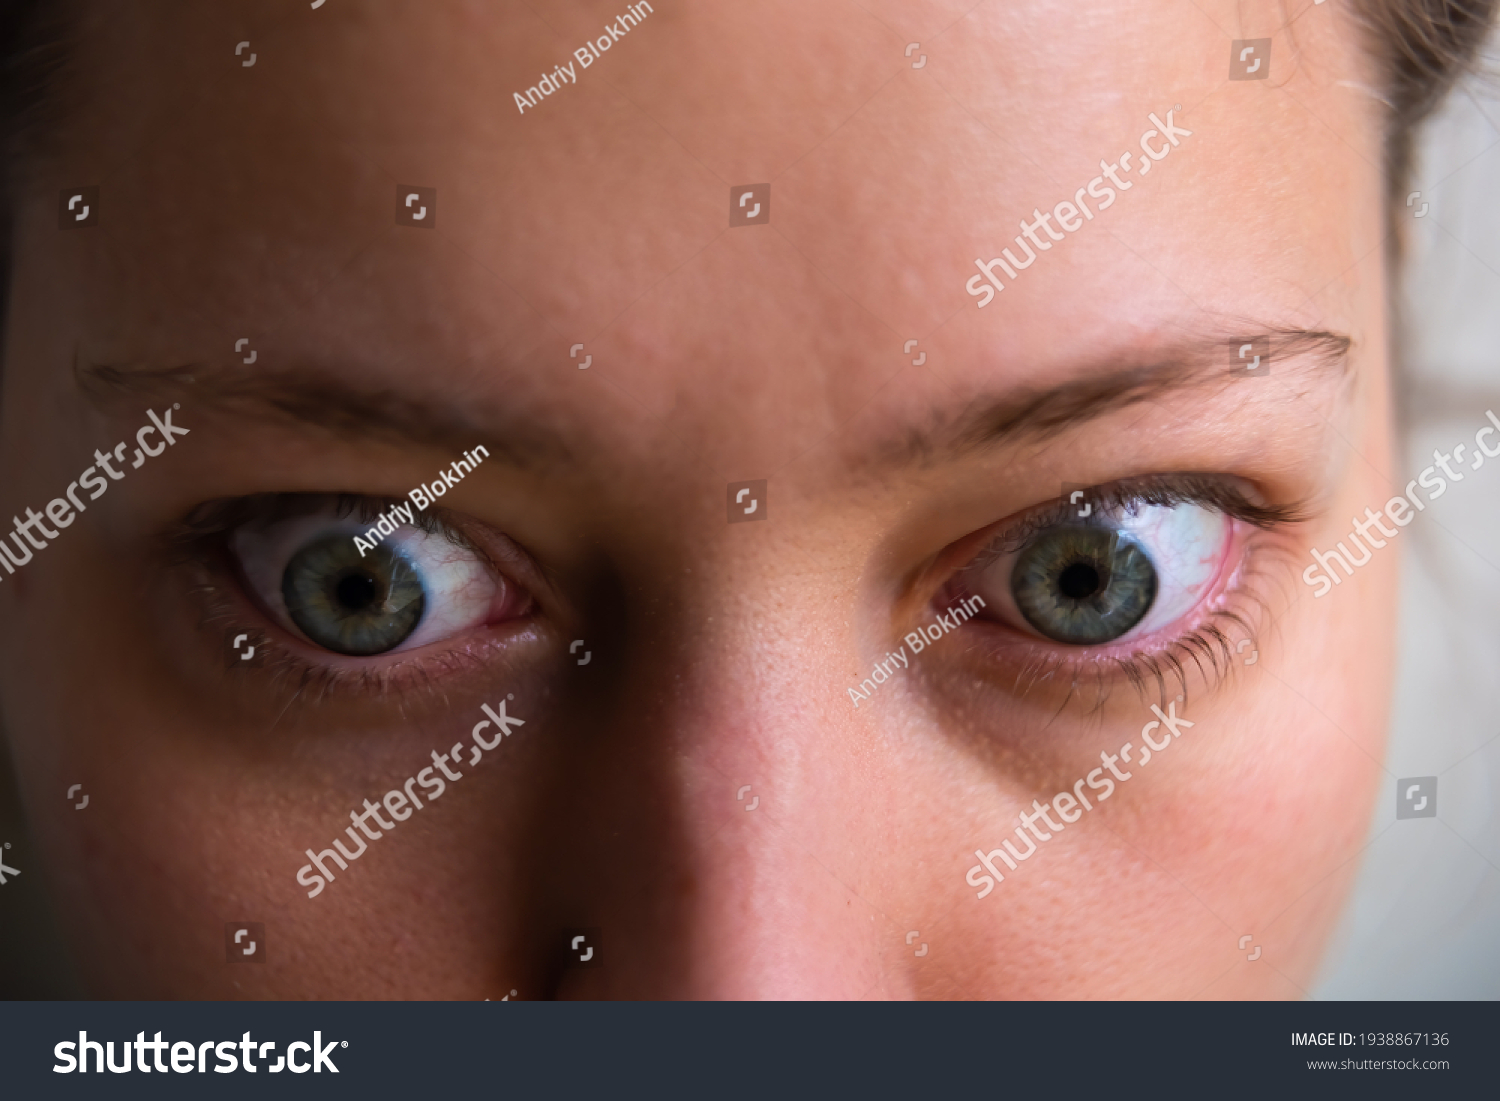 Macro closeup of young woman face with Grave's disease hyperthyroidism symptoms of ophthalmopathy bulging eyes proptosis edema #1938867136